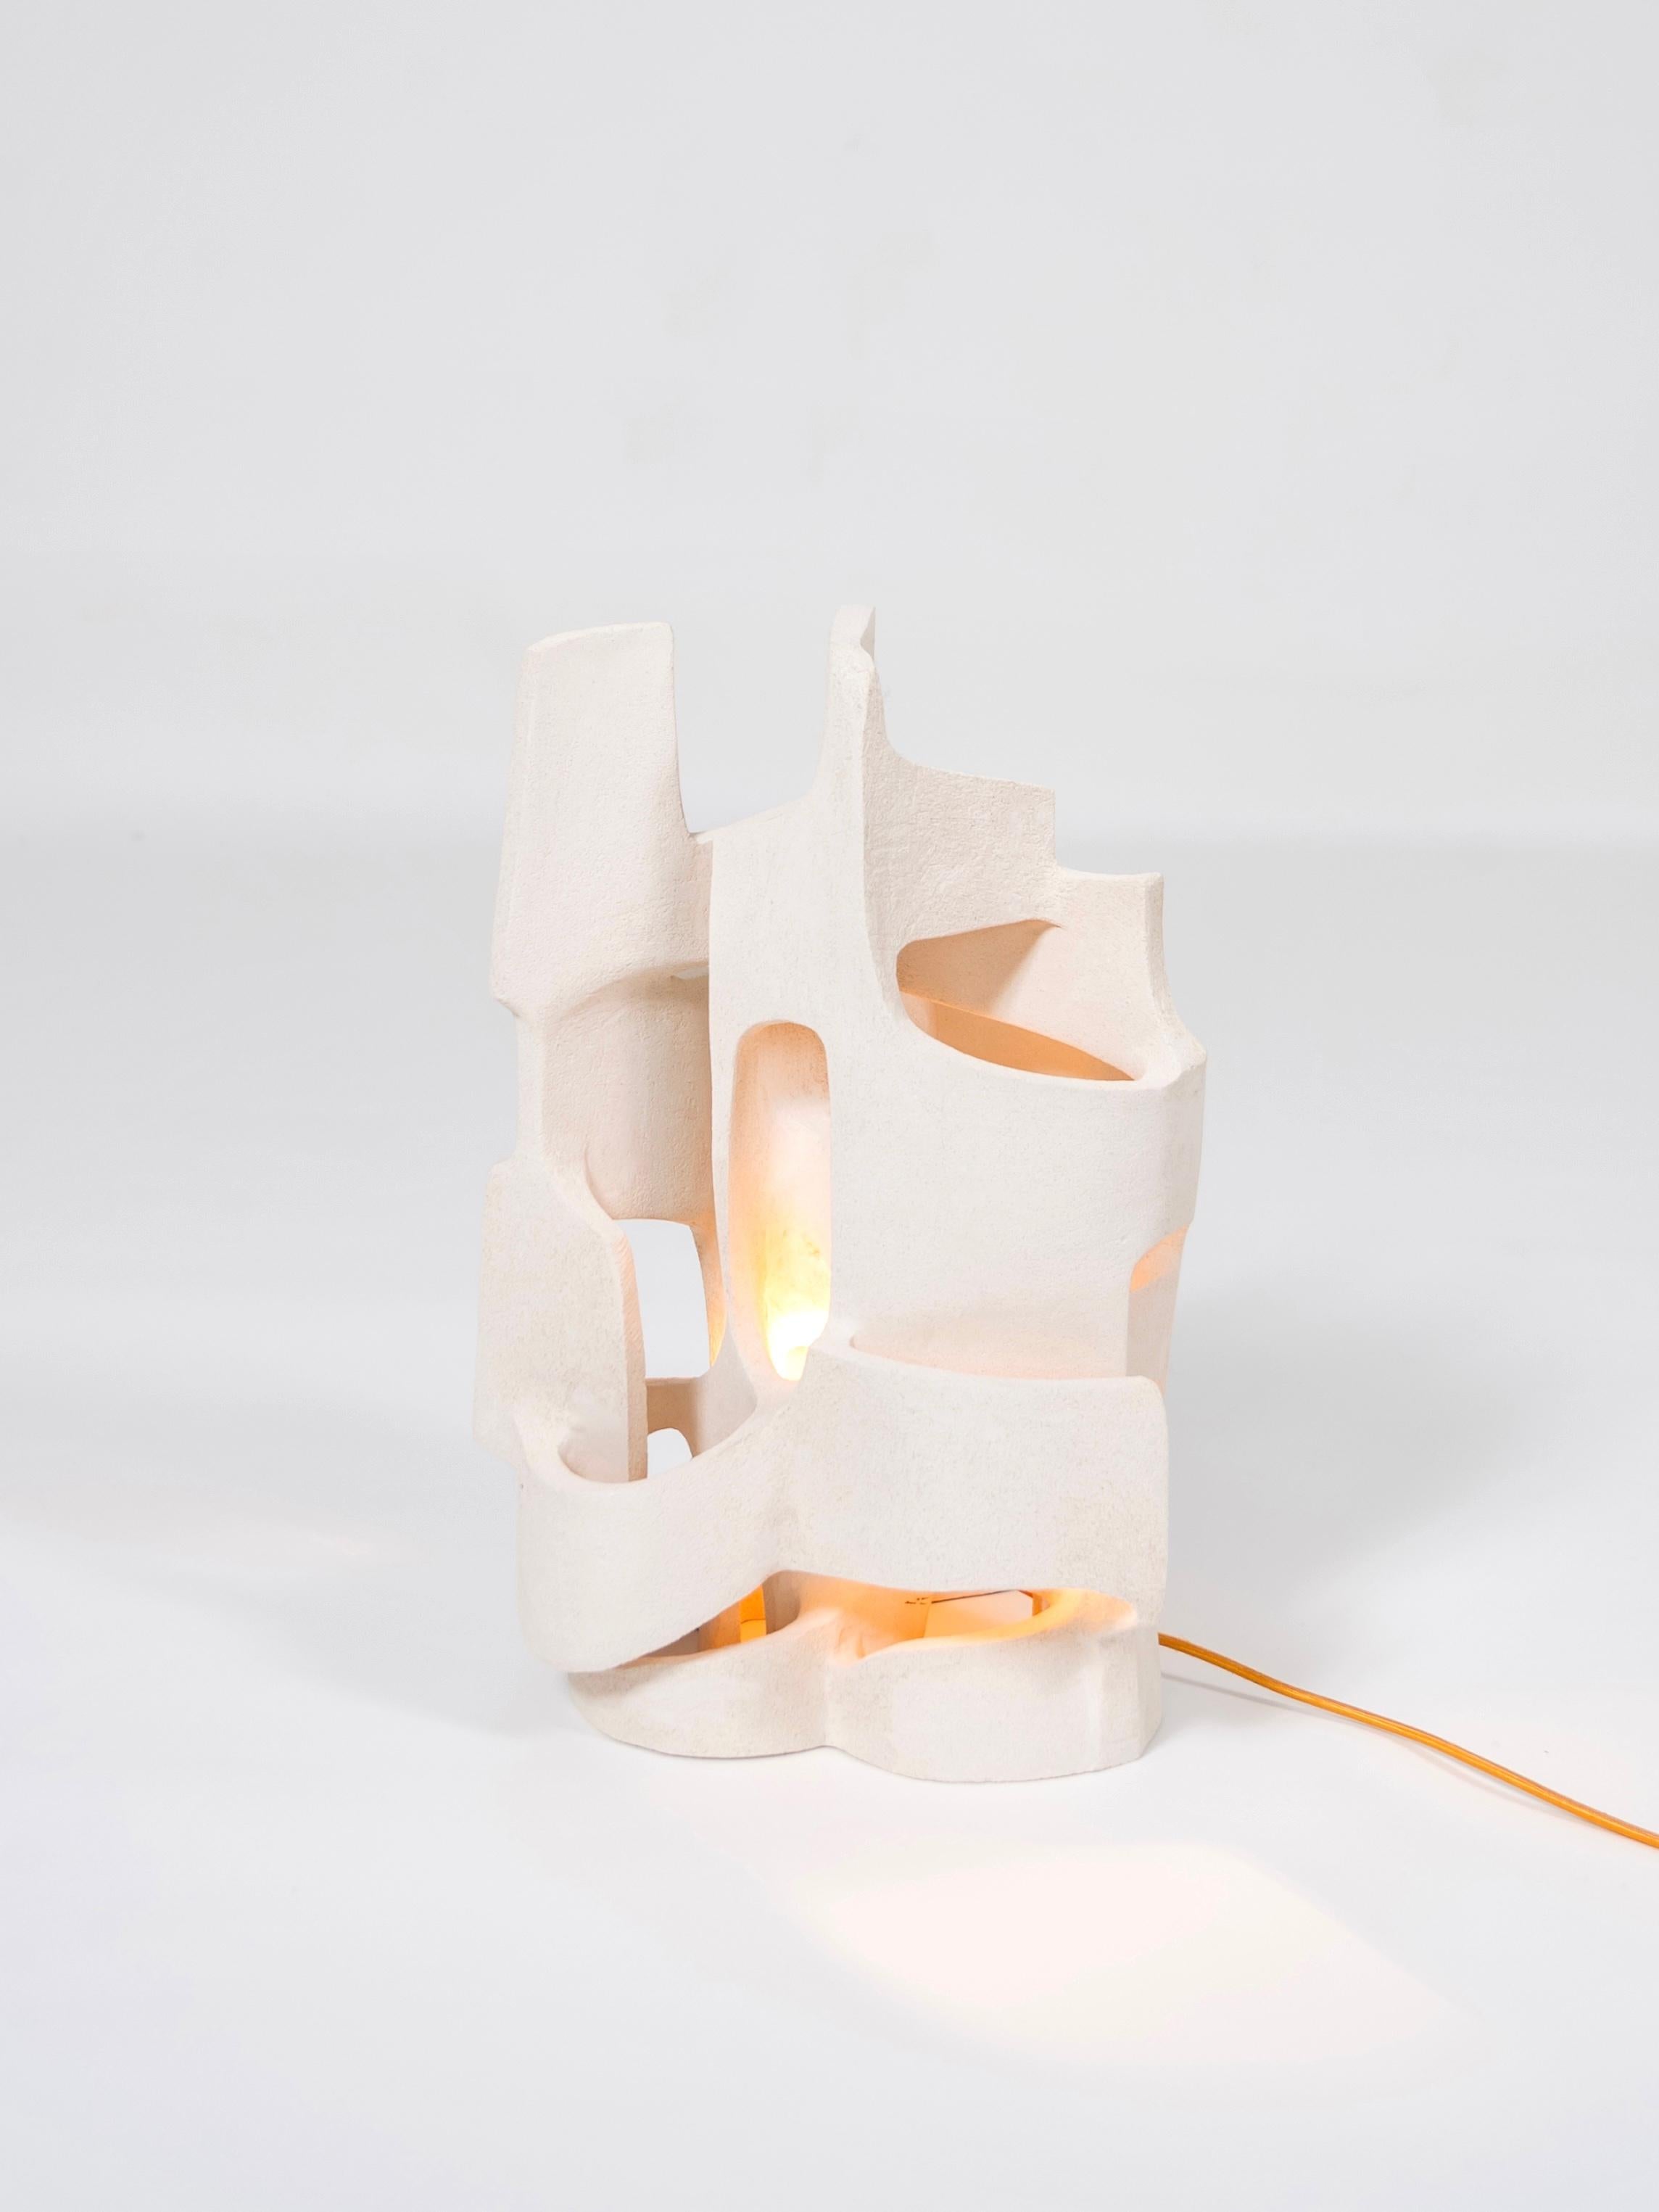 Lighting sculpture by Camille Le Dressay, 2022

One-of-a-kind piece, signed and dated.

Material: White stoneware
Dimensions: H 55 x 35 x 35 cm
Year: 2022

Adopting ceramic as her material of choice, Le Dressay's work ranges from sculptures